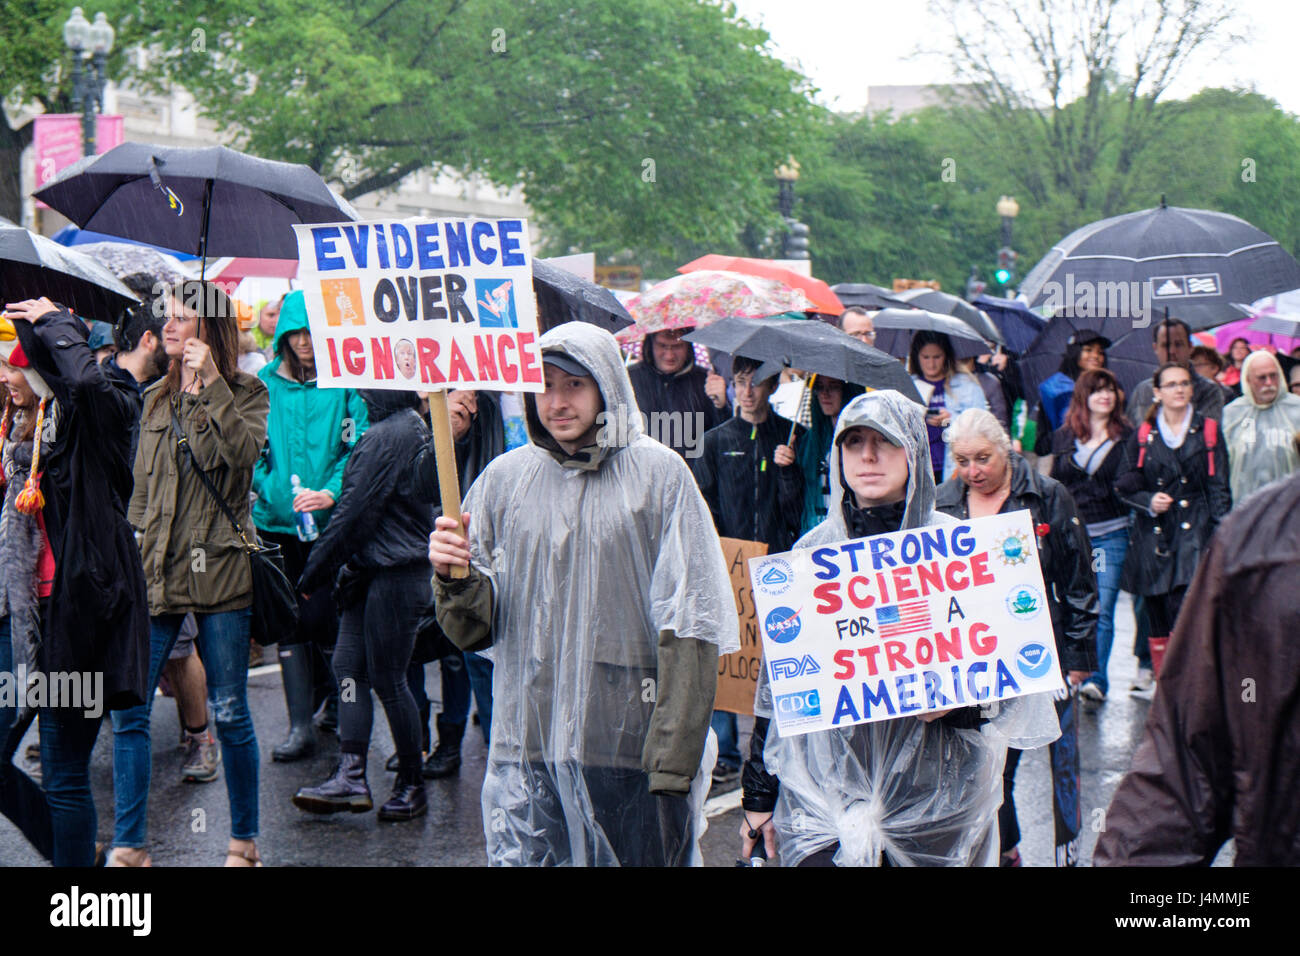 March for Science rally on Earth Day, Washington DC, USA, April 22, 2017. Activists and protesters marching along Constitution Avenue to the United St Stock Photo